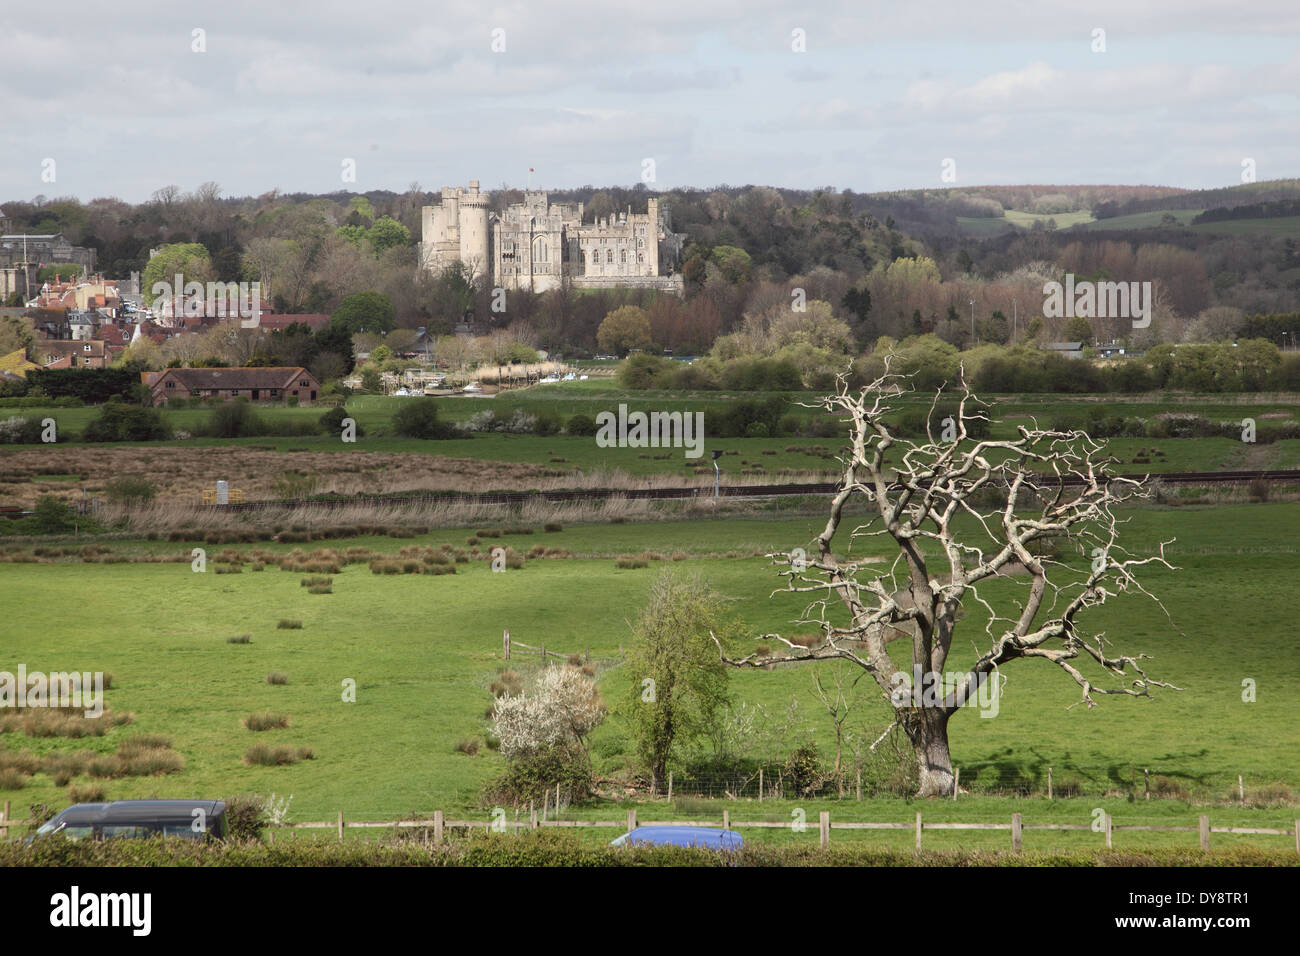 Arundel Castle in the historic English town of Arundel, West Sussex, viewed across the flood plian of the River Arun Stock Photo